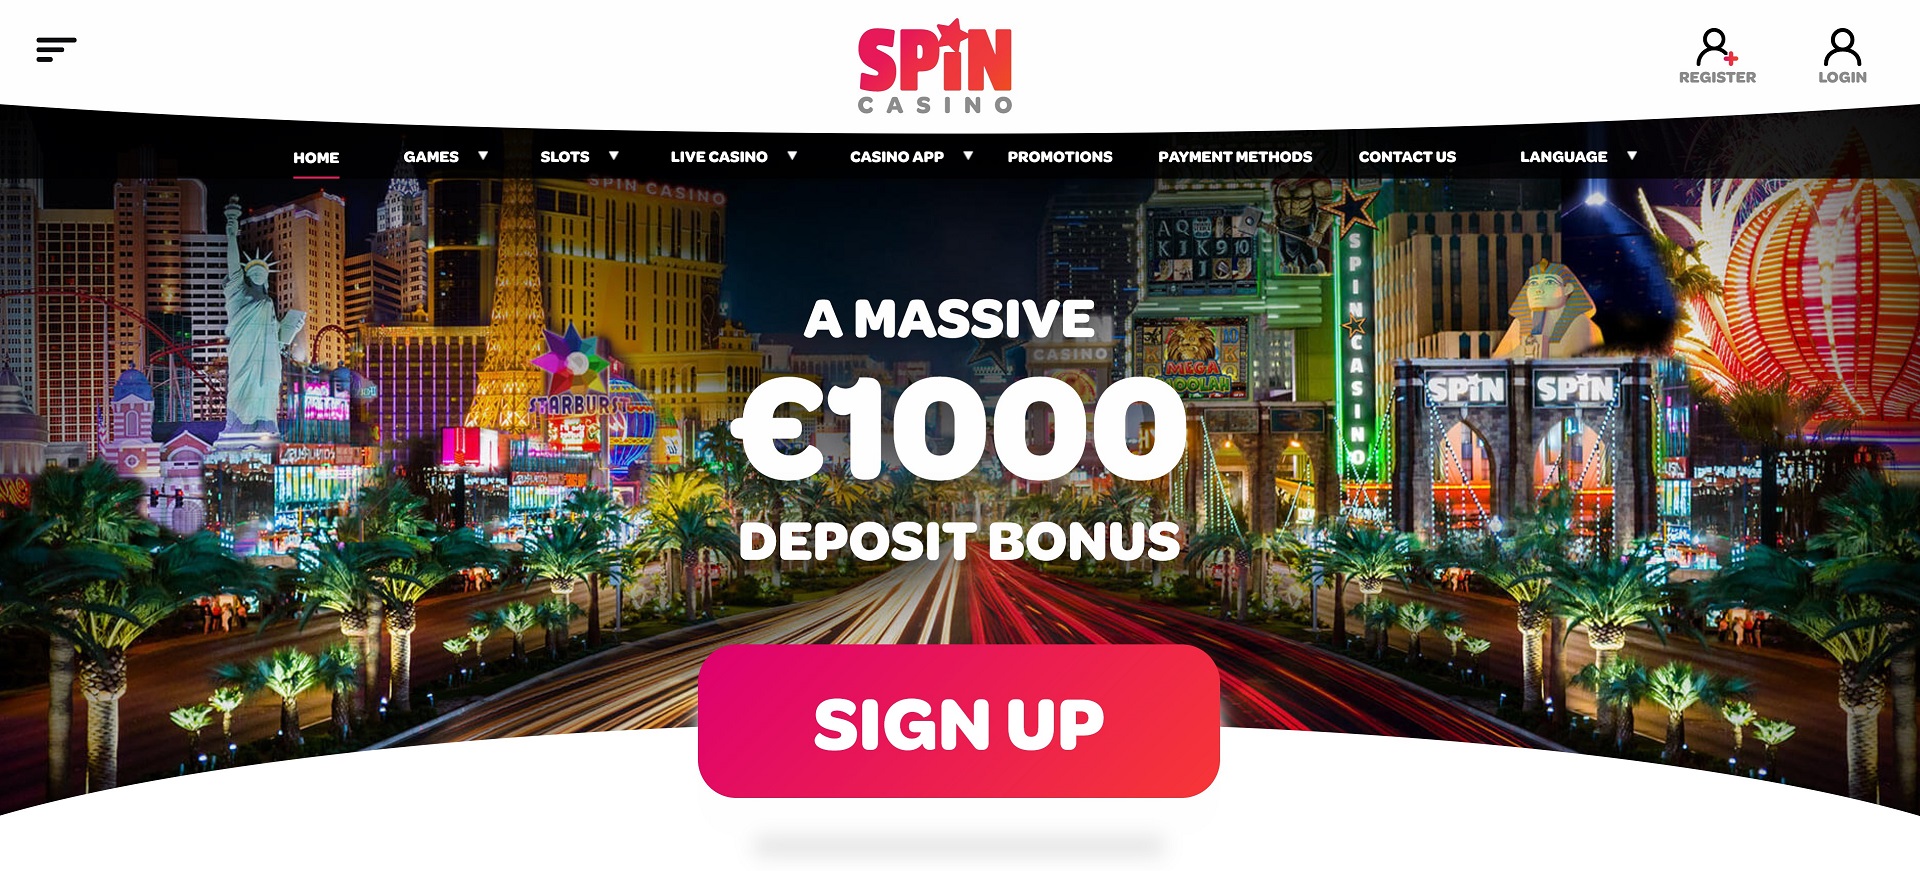 Spin Casino Main Page